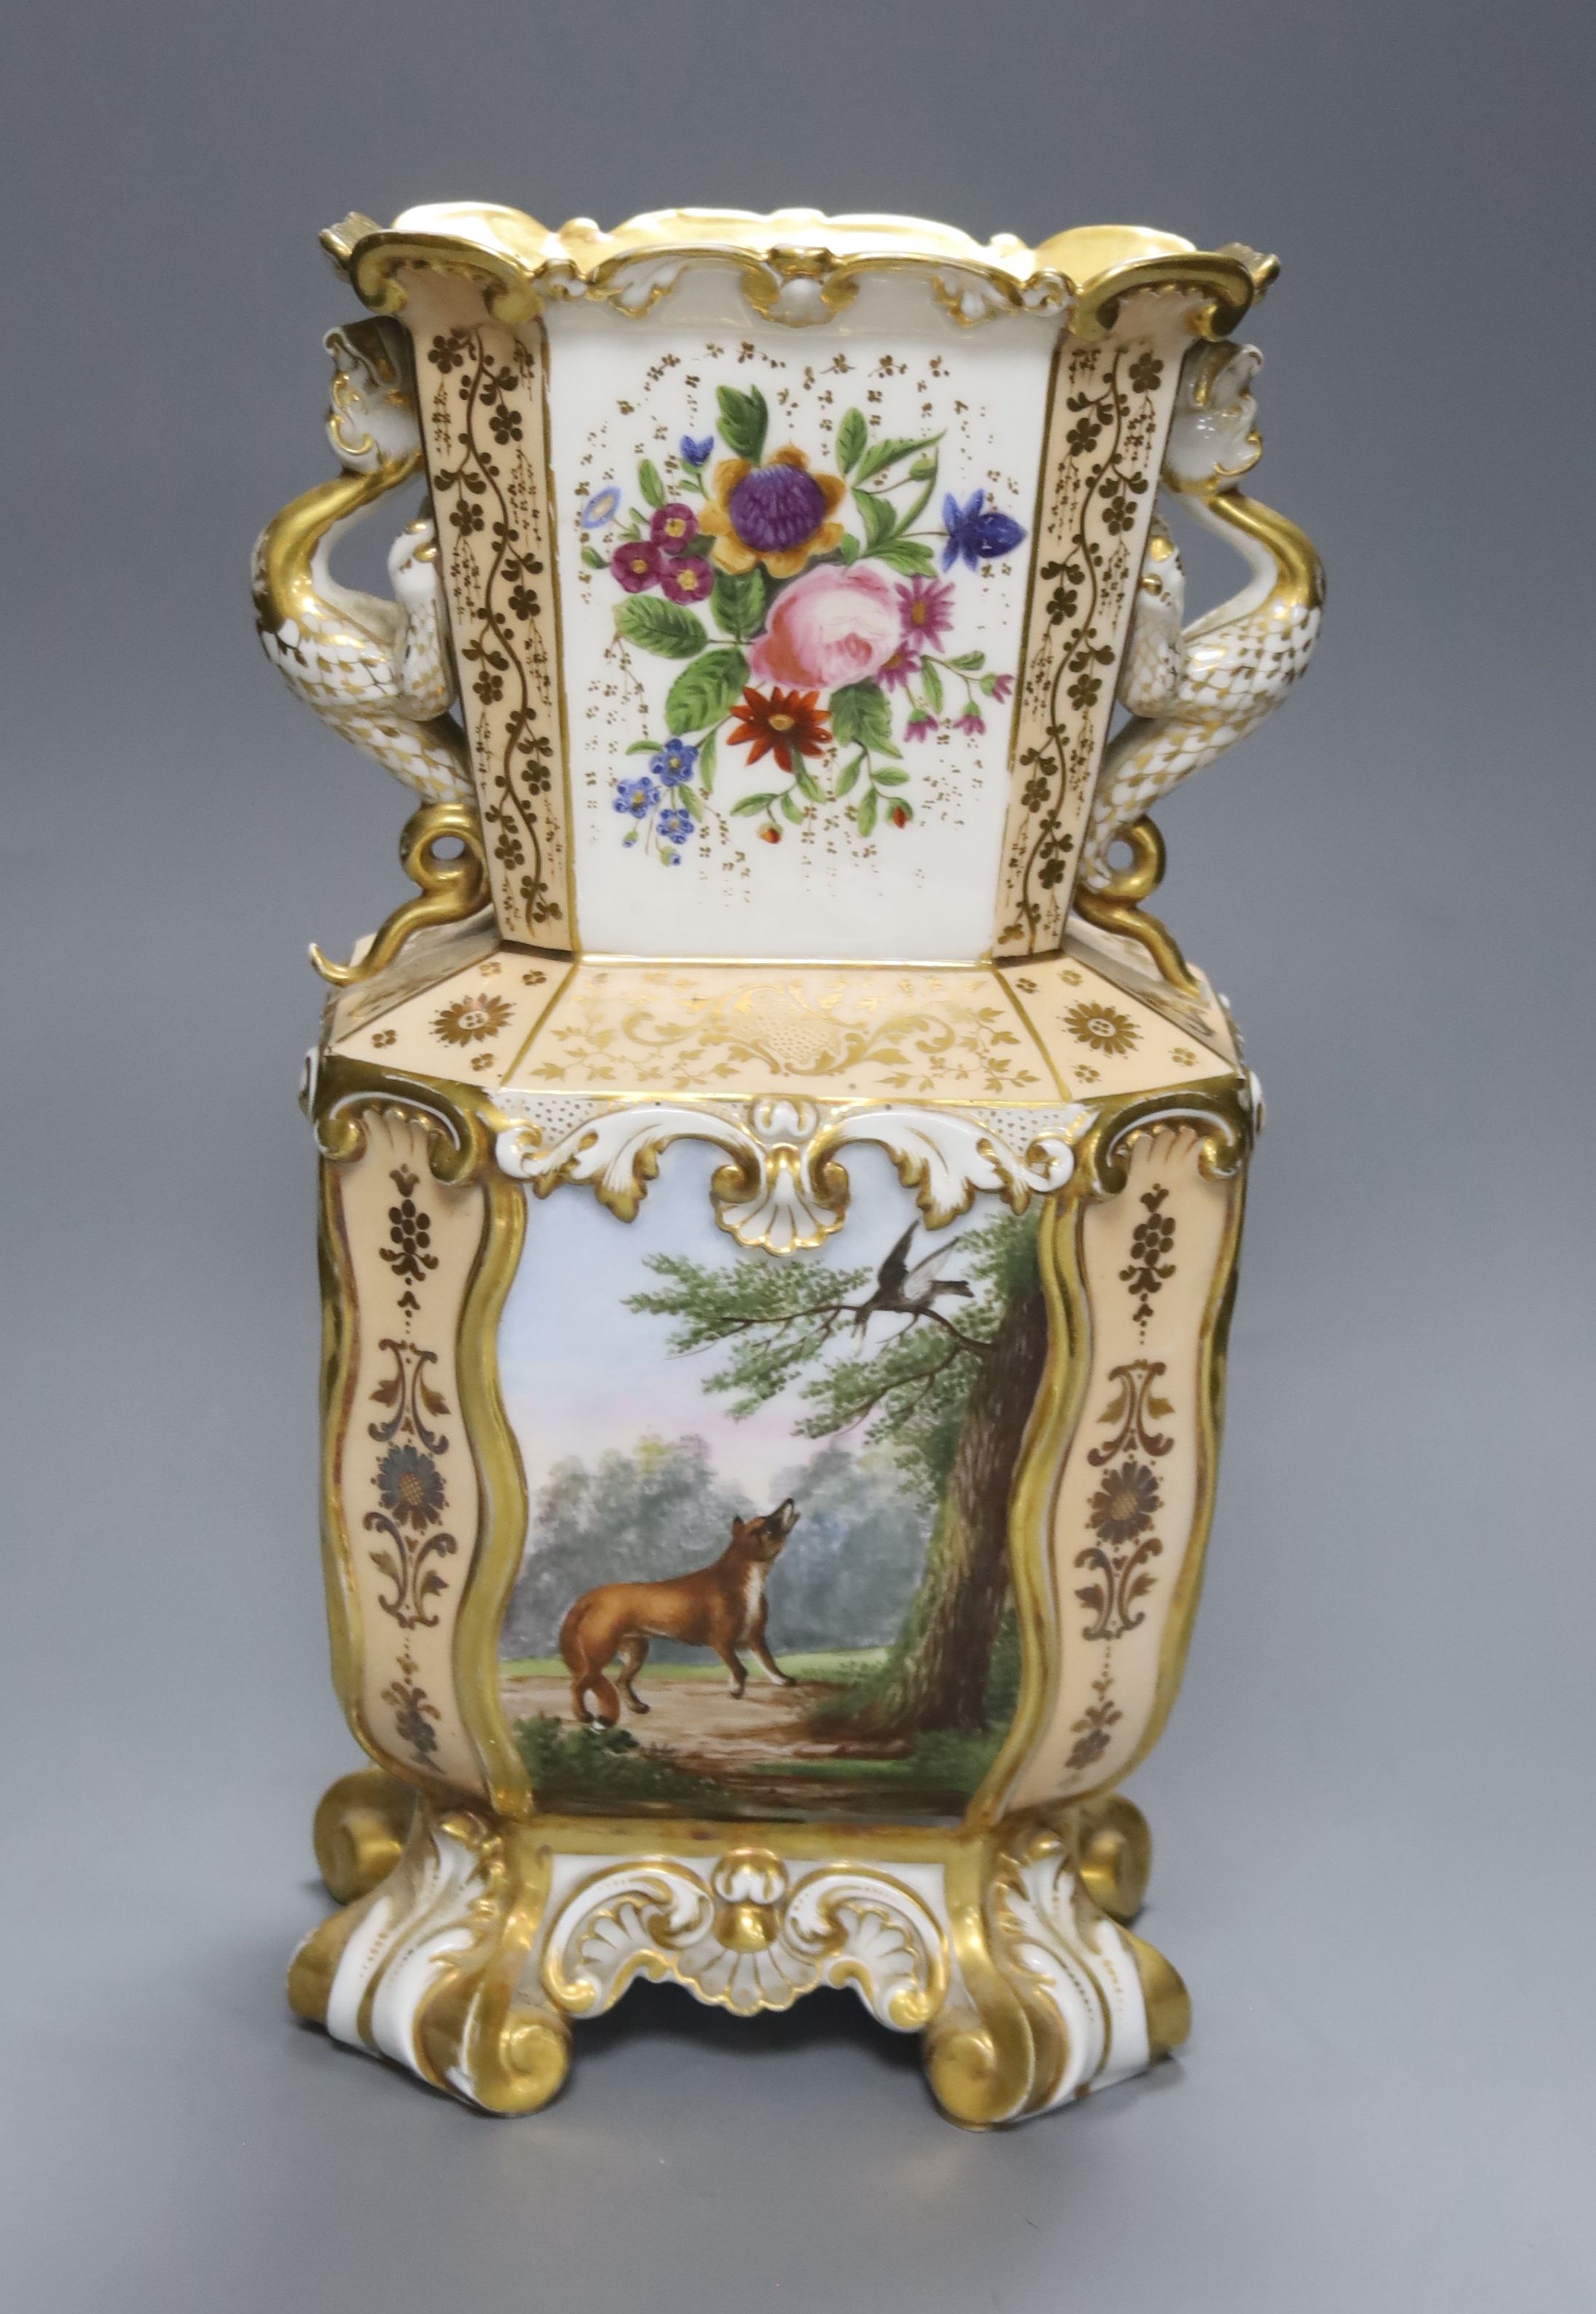 A 19th century French porcelain vase, height 31cm